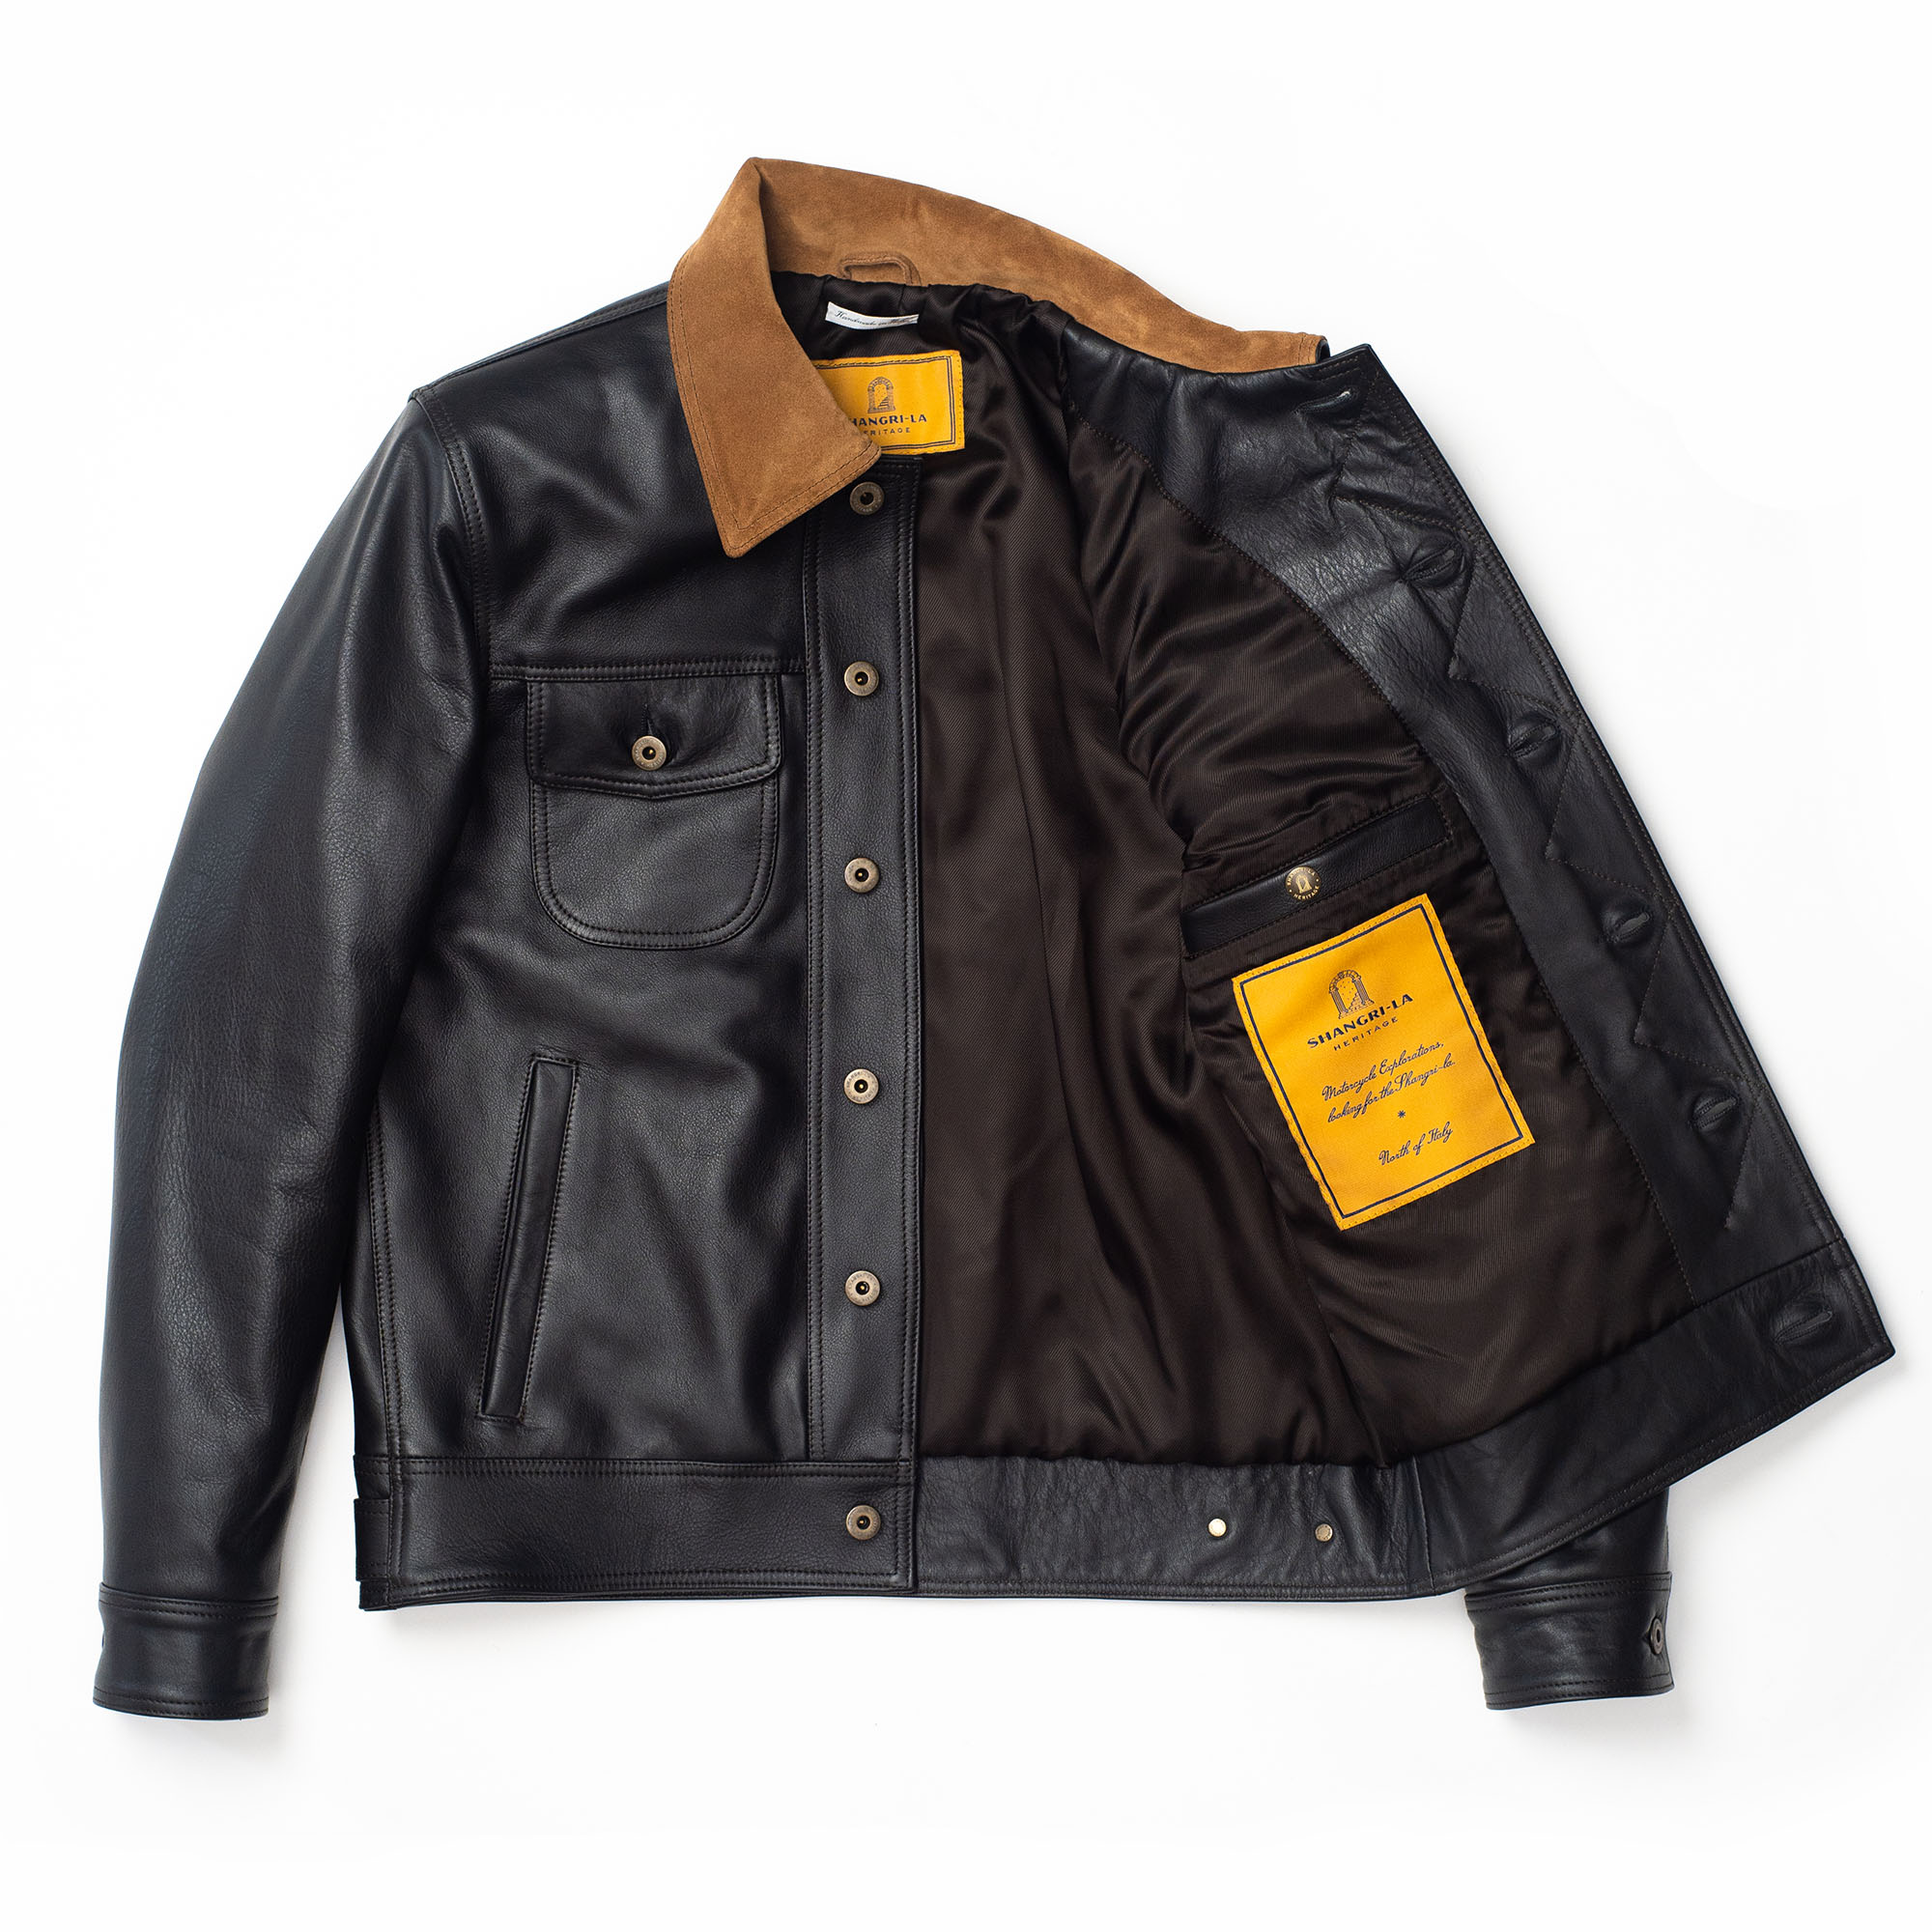 "Terracotta" Ranch Leather Jacket